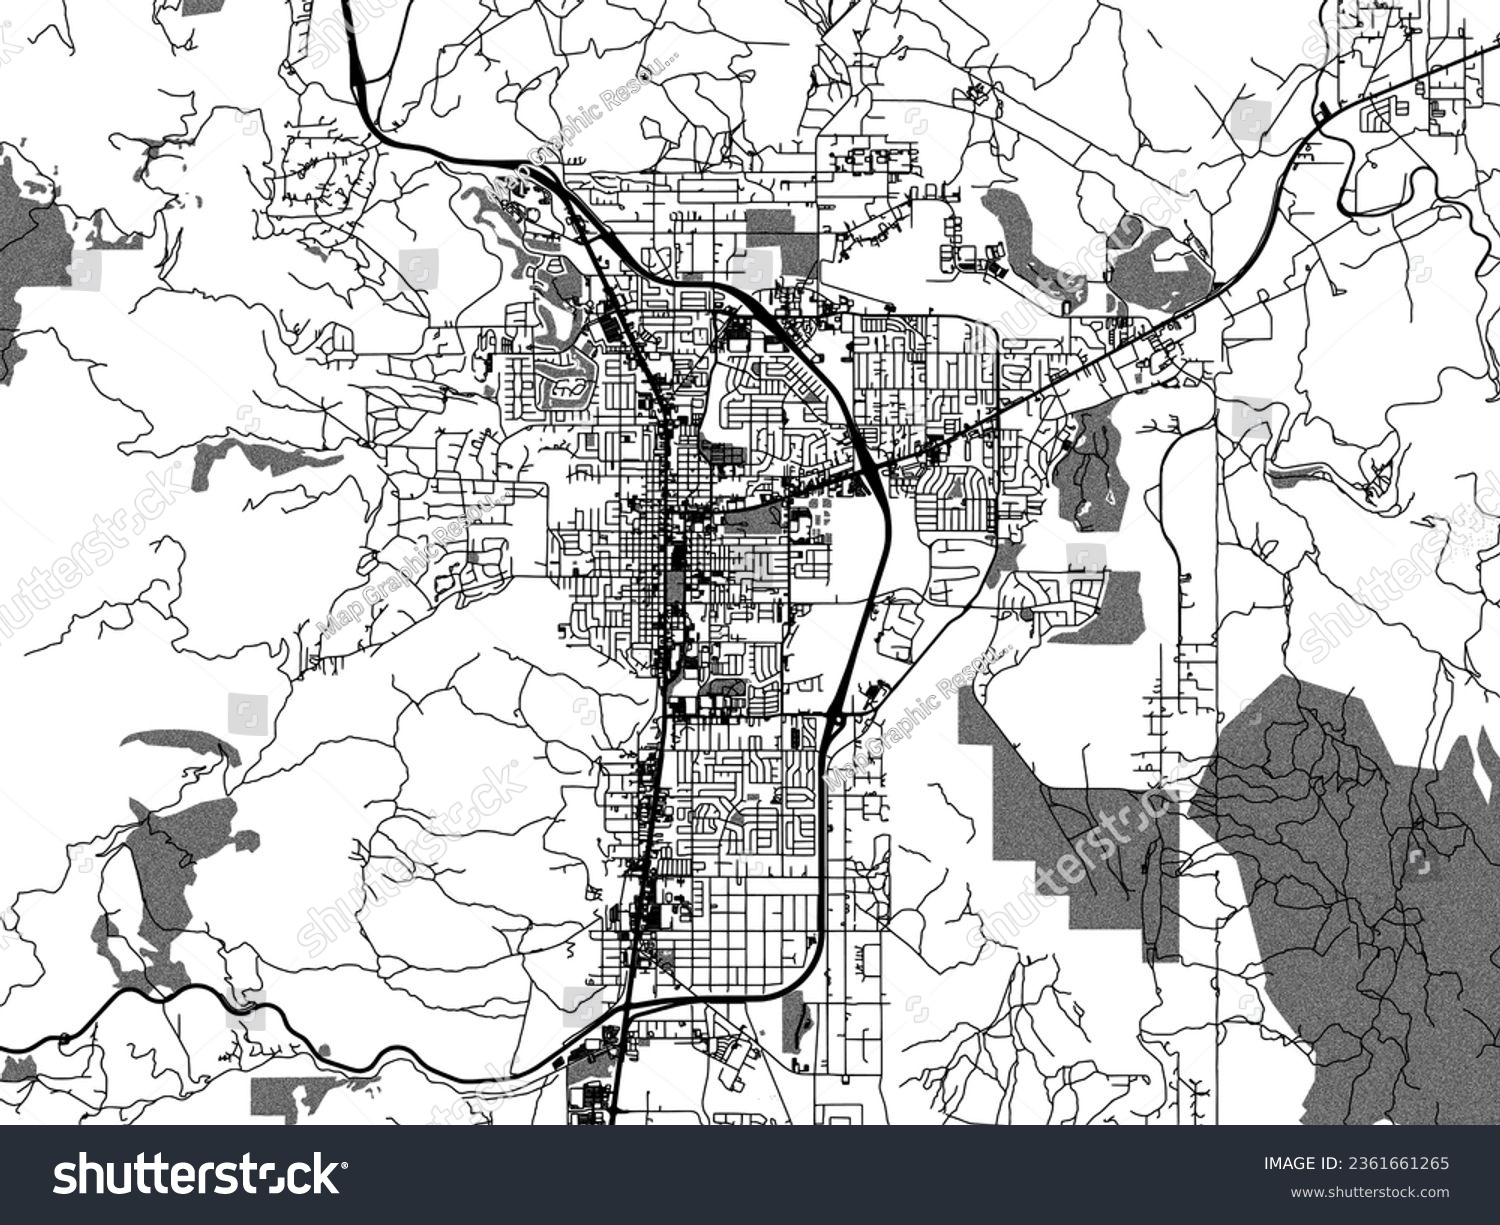 SVG of Greyscale vector city map of Carson City Nevada in the United States of America with with water, fields and parks, and roads on a white background. svg